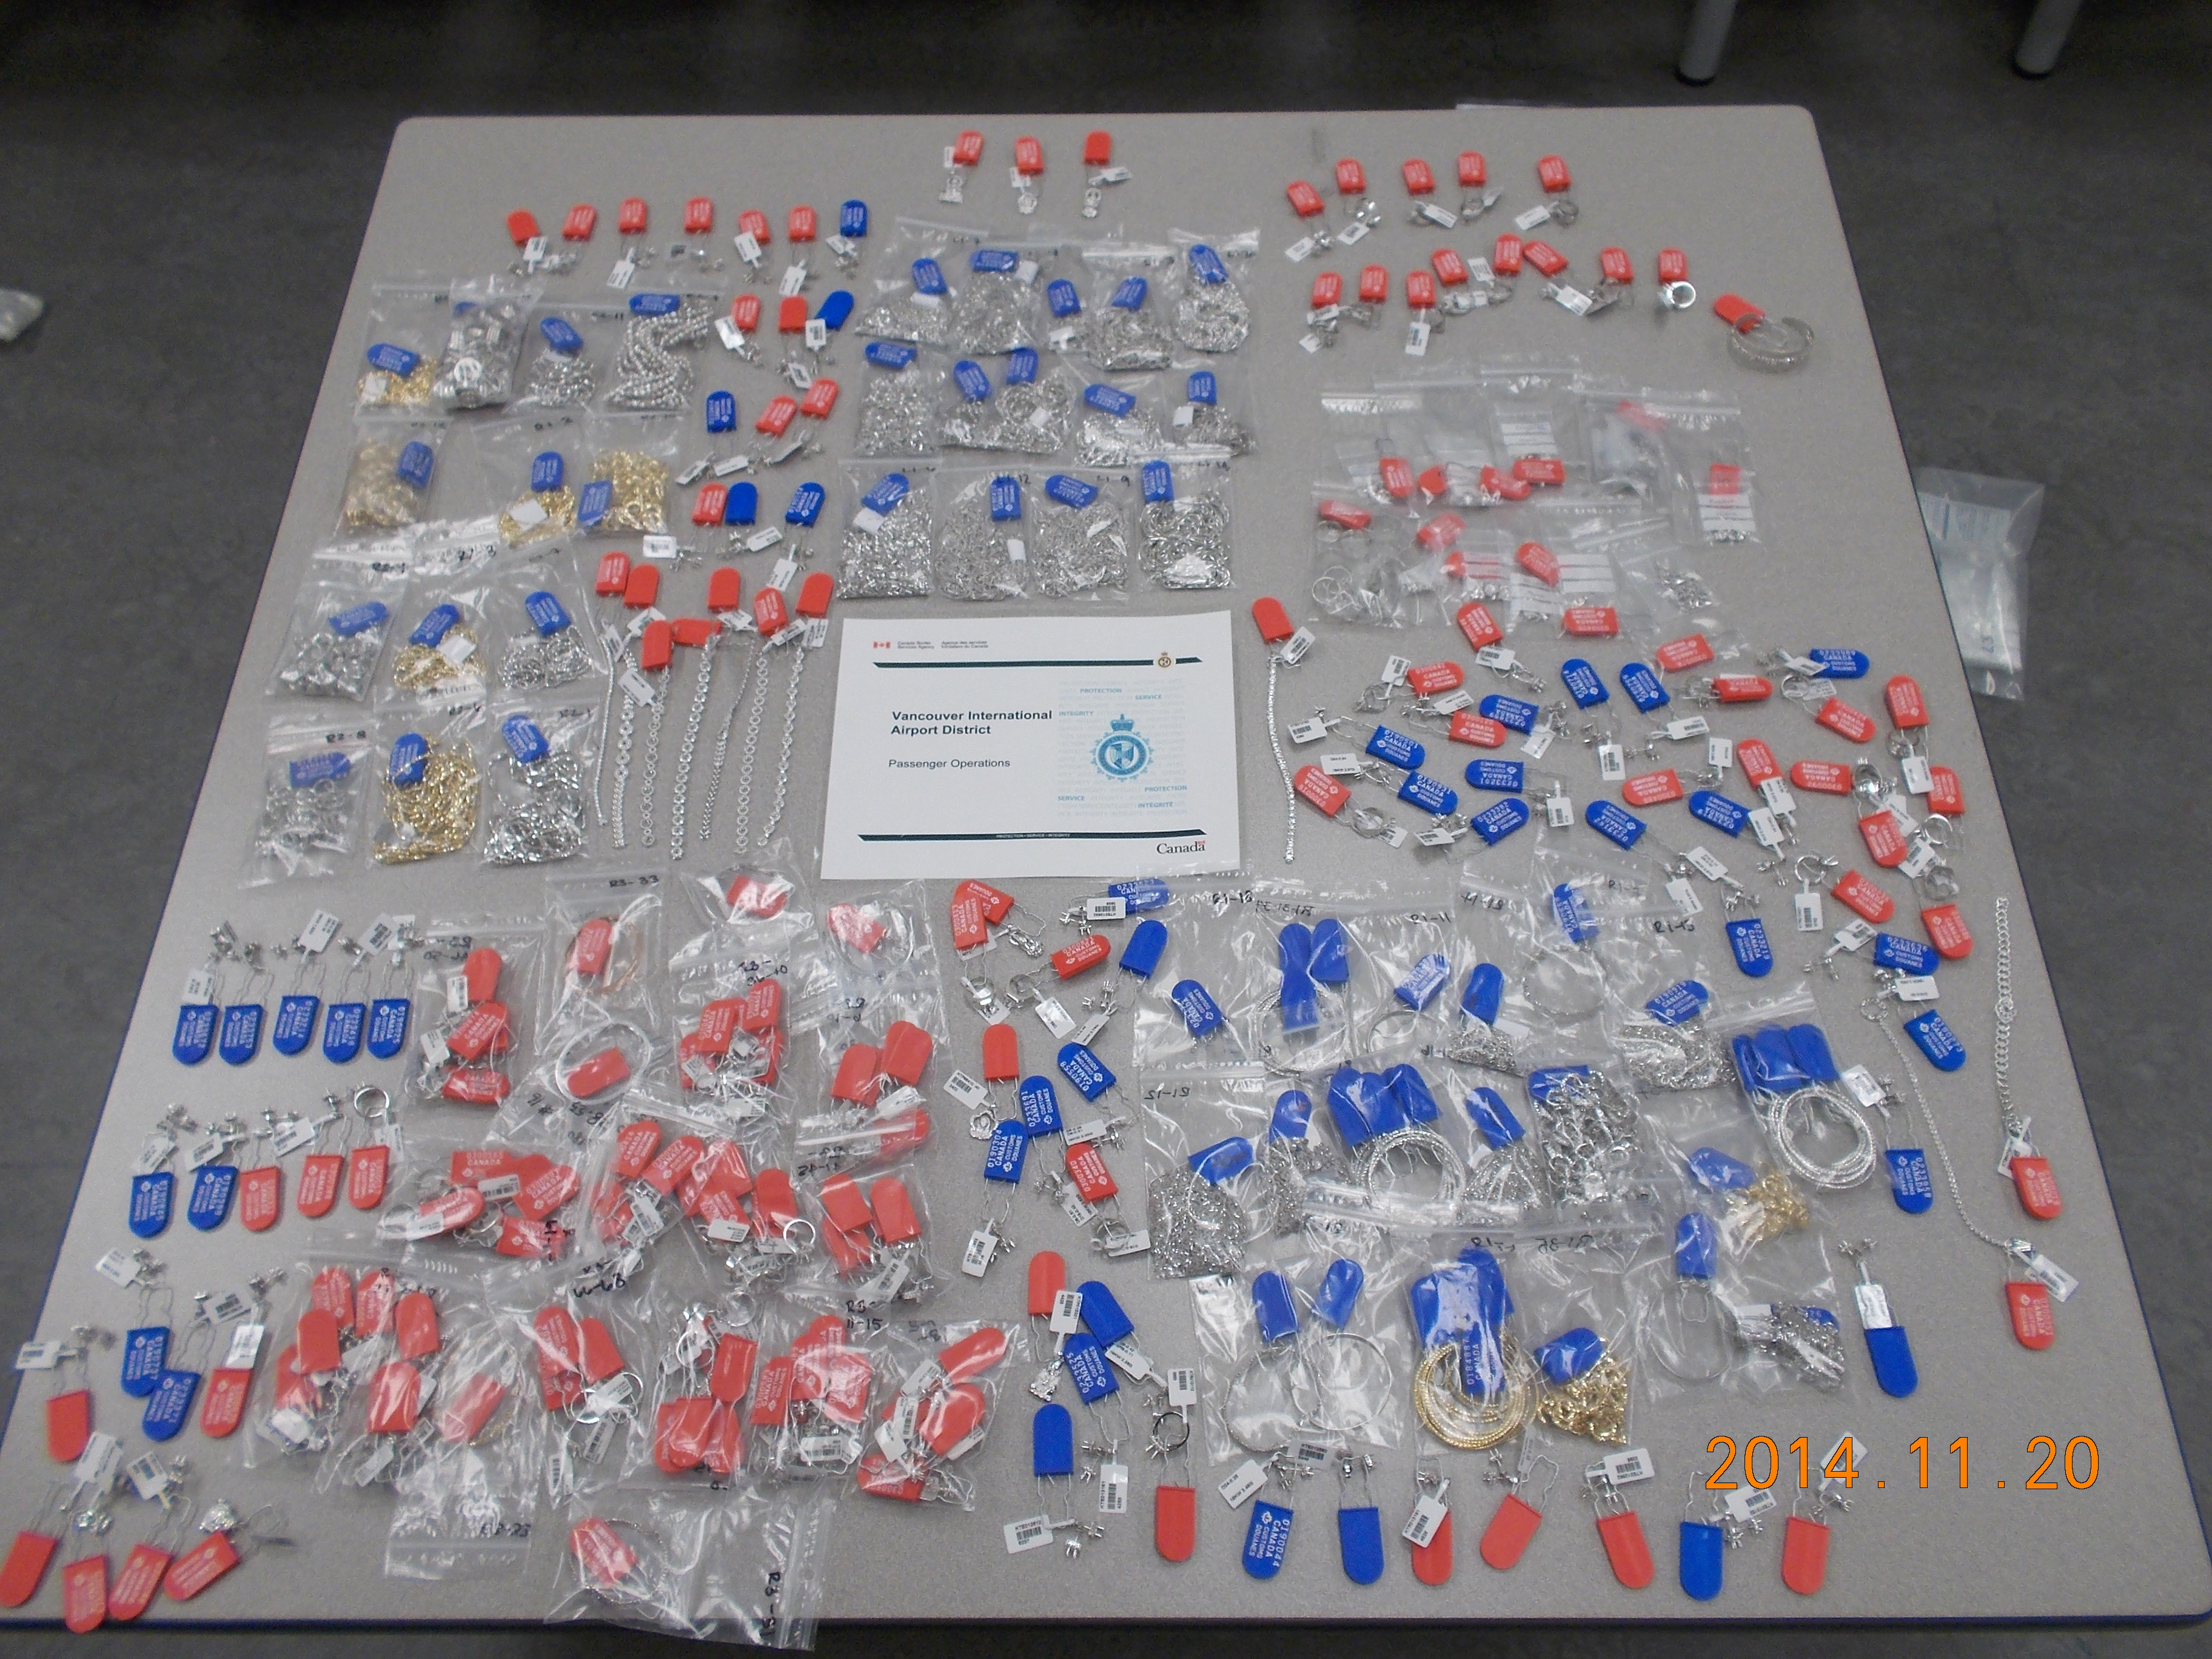 Undeclared jewelry concealed around a traveller's ankles was seized at the Vancouver International Airport. 